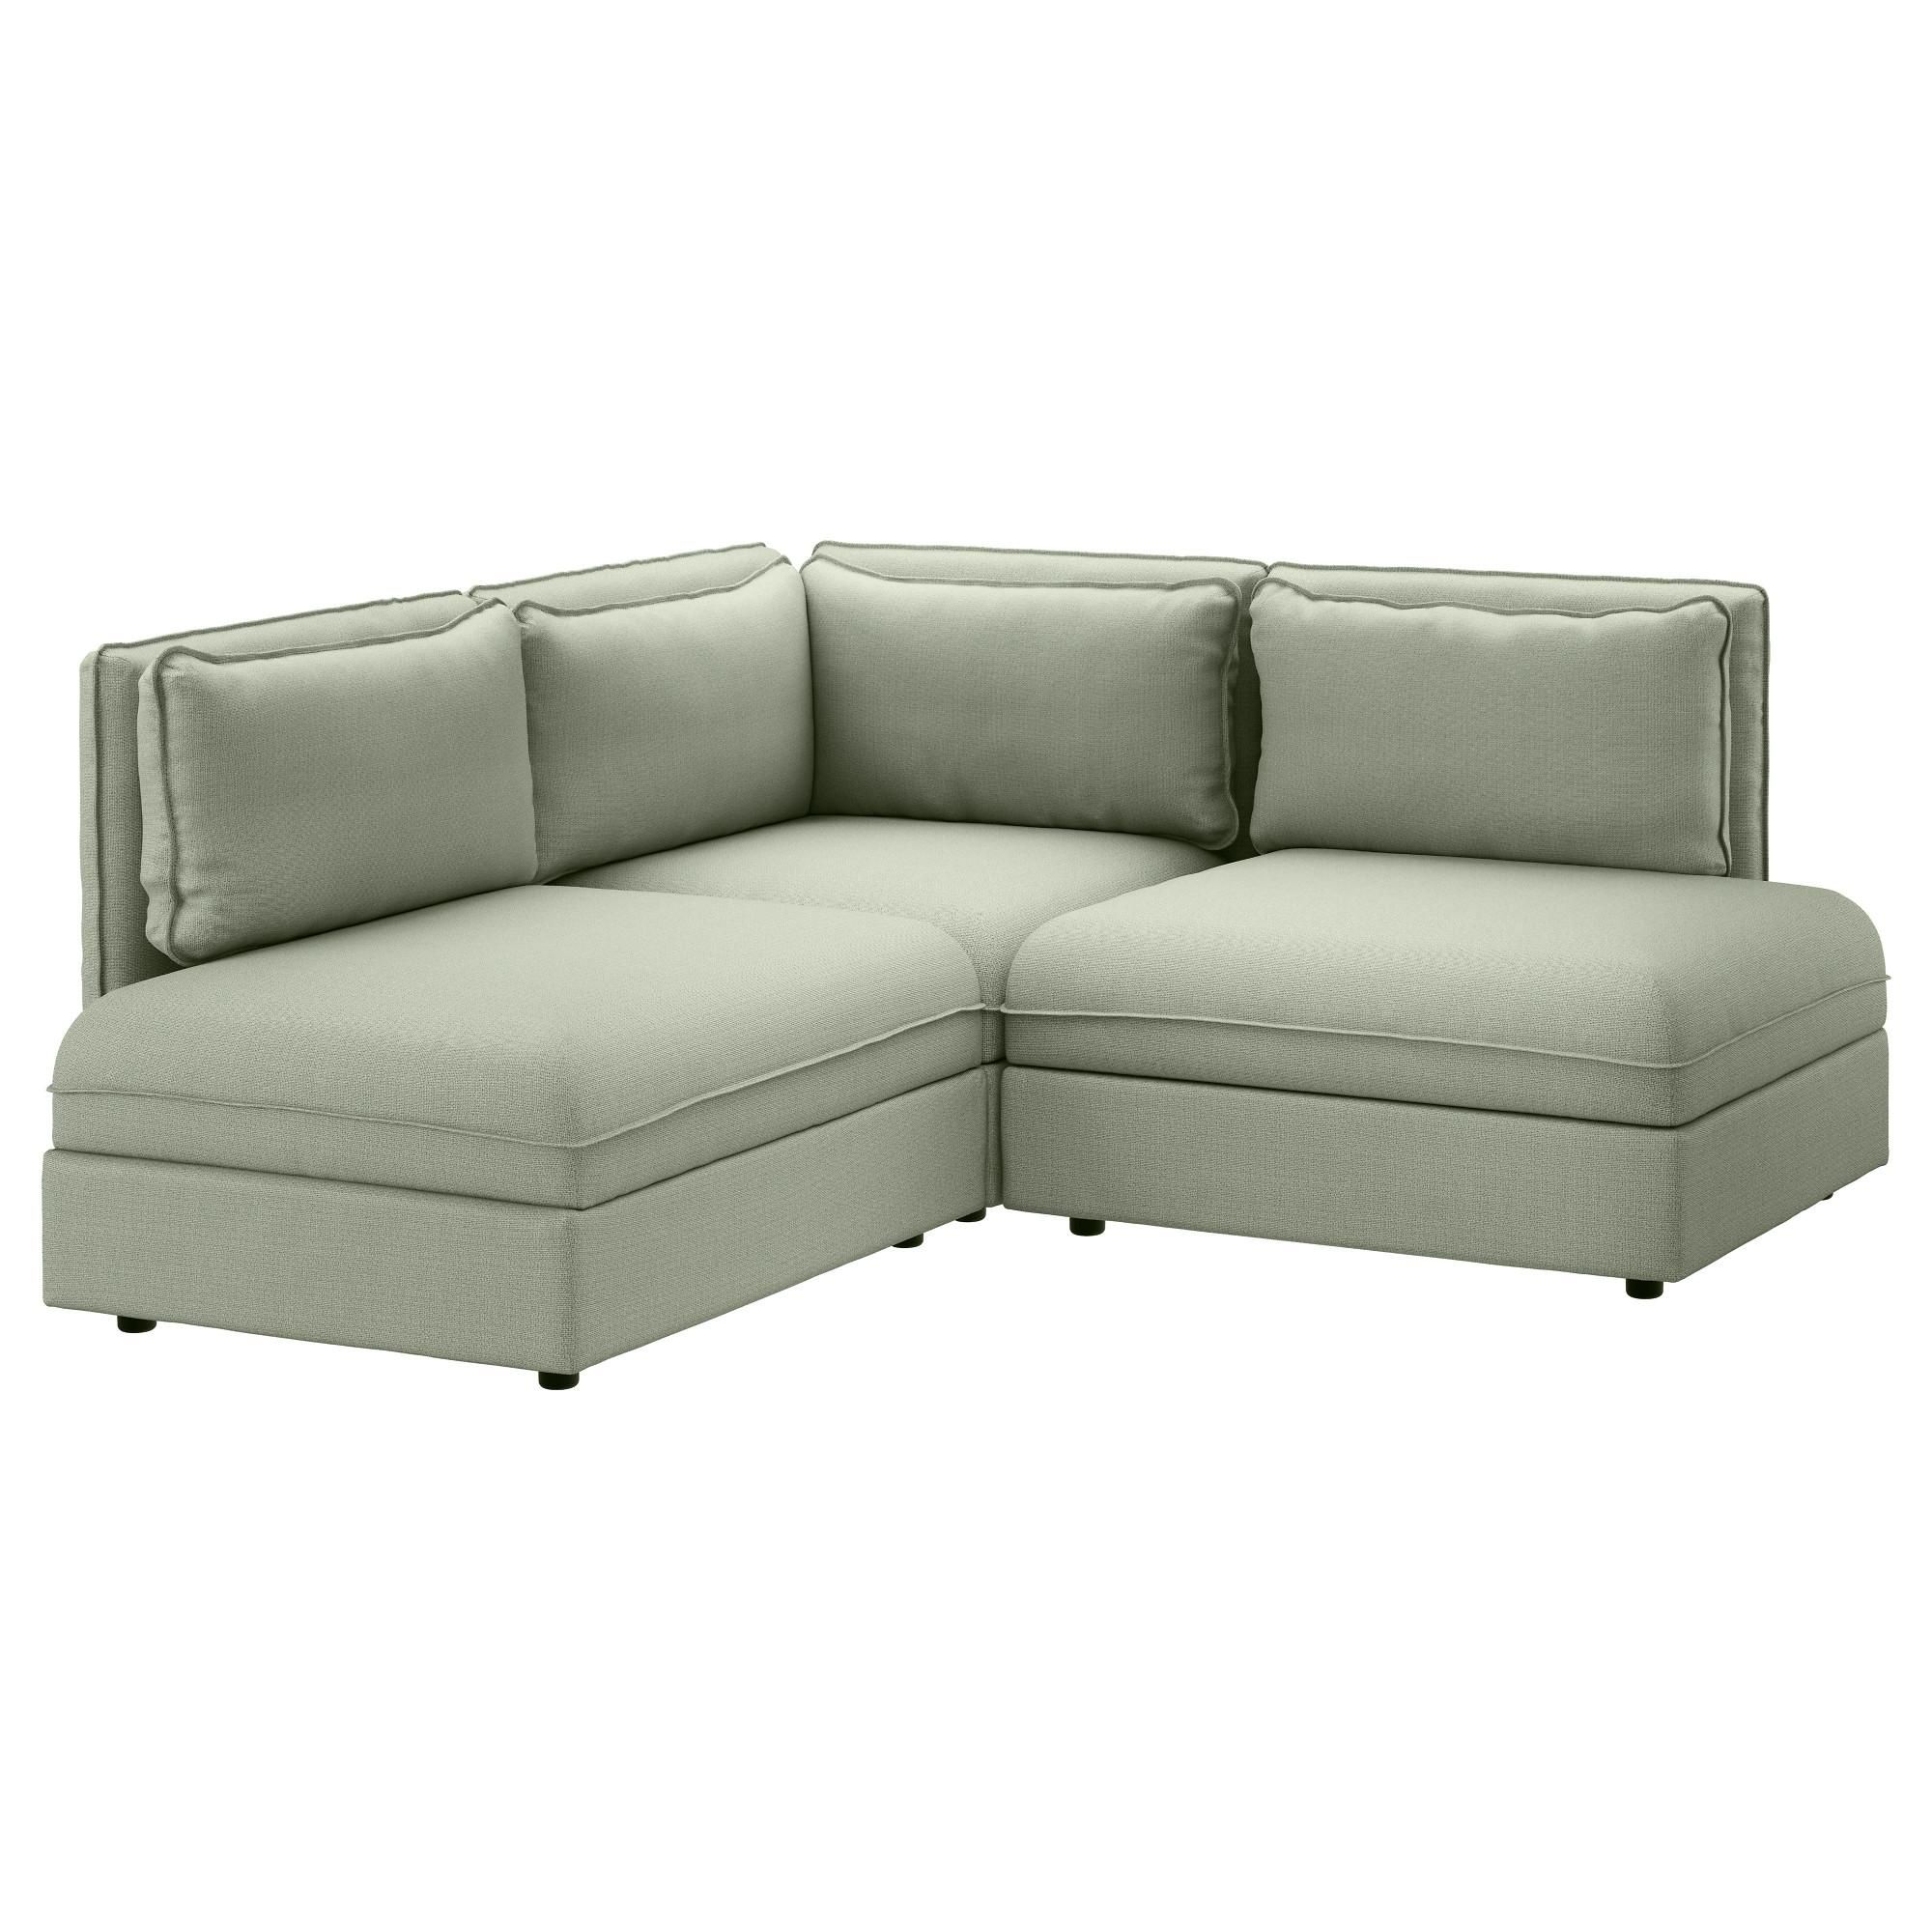 Sectional Sofas & Couches – Ikea Regarding 2 Seat Sectional Sofas (View 2 of 15)